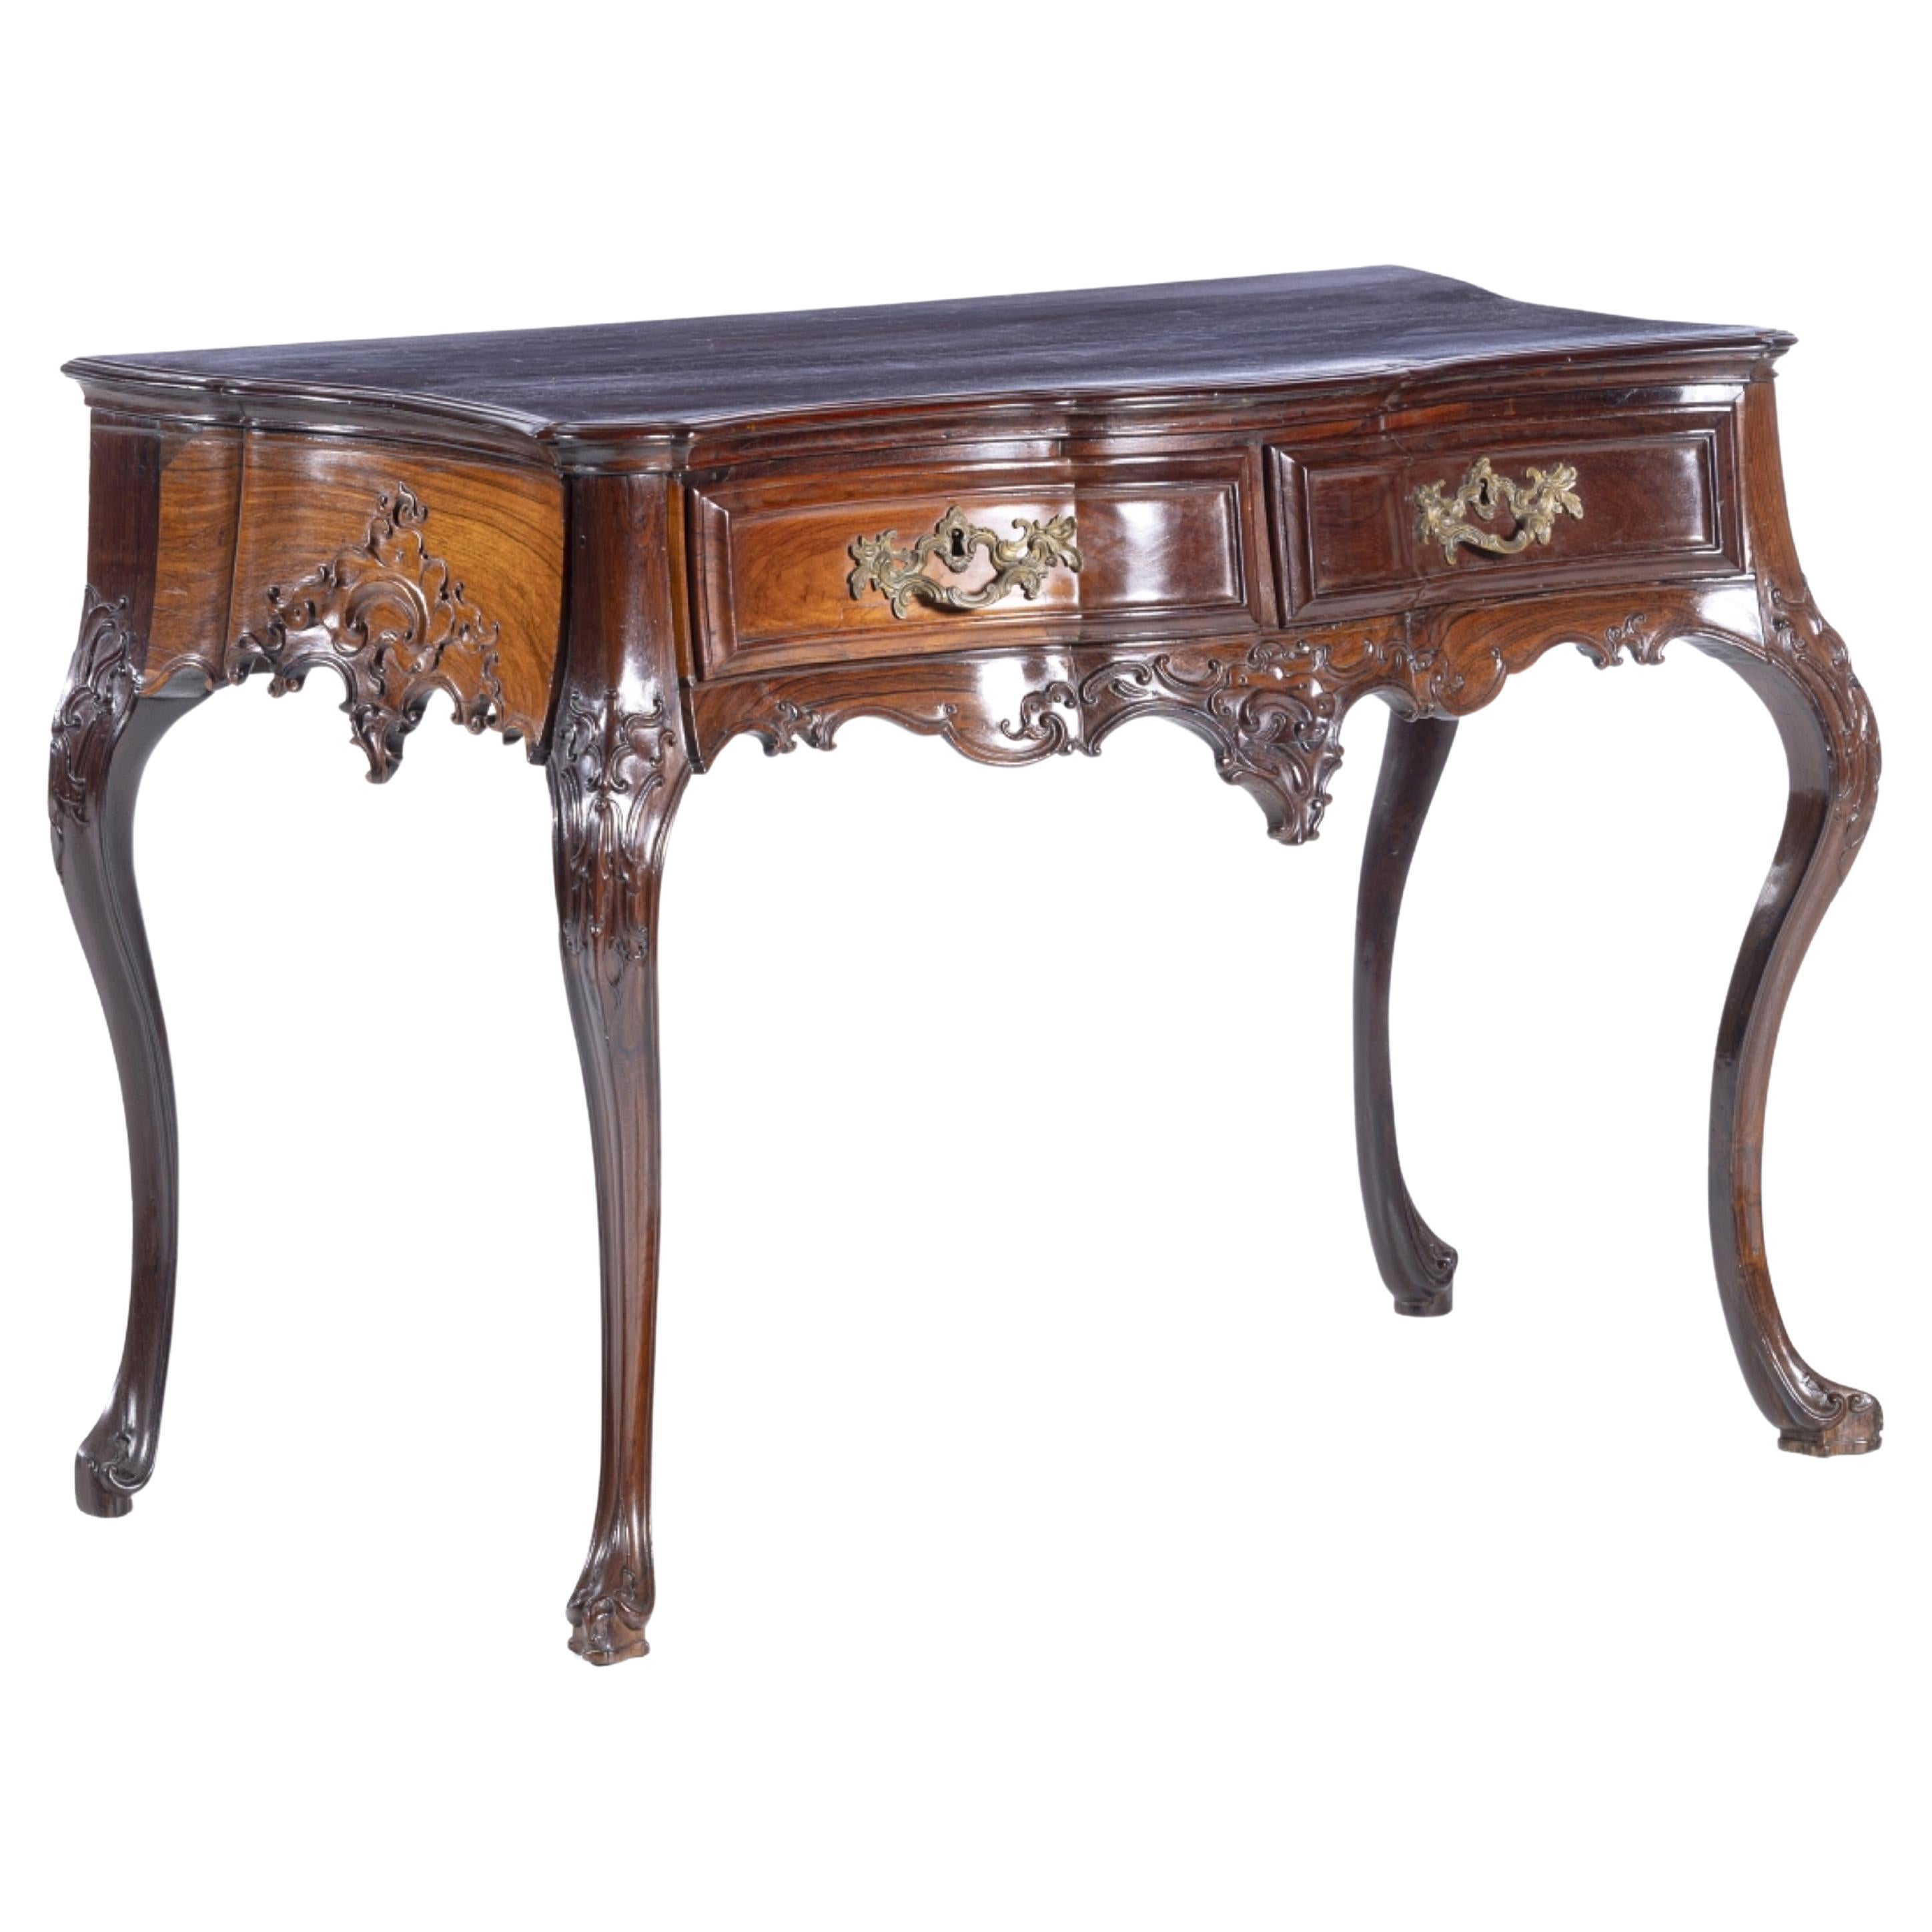 Important Portuguese Backing Table D. José 18th Century Rosewood For Sale